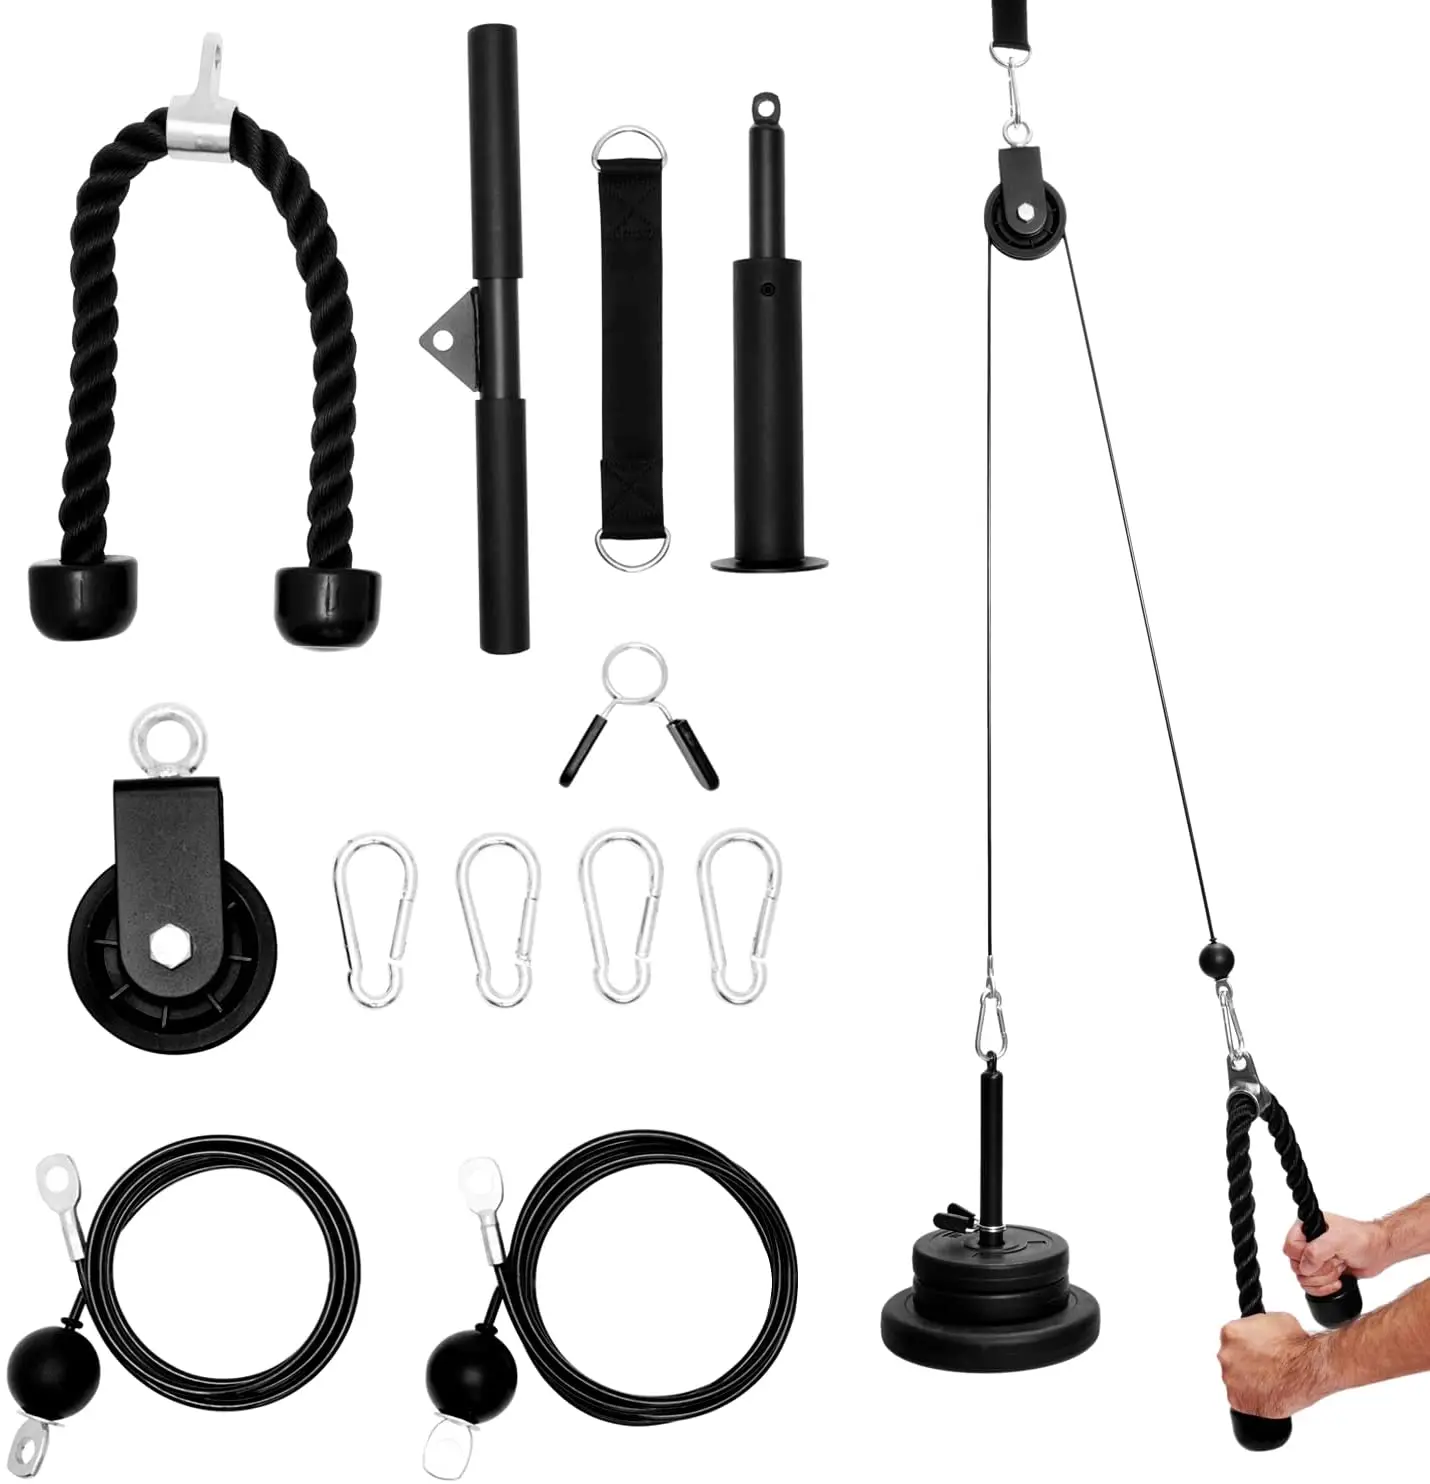 Gym LAT Pull Down Lift Cable Pulley Attachments Weight Cable Pulley System Gym Fitness Equipment